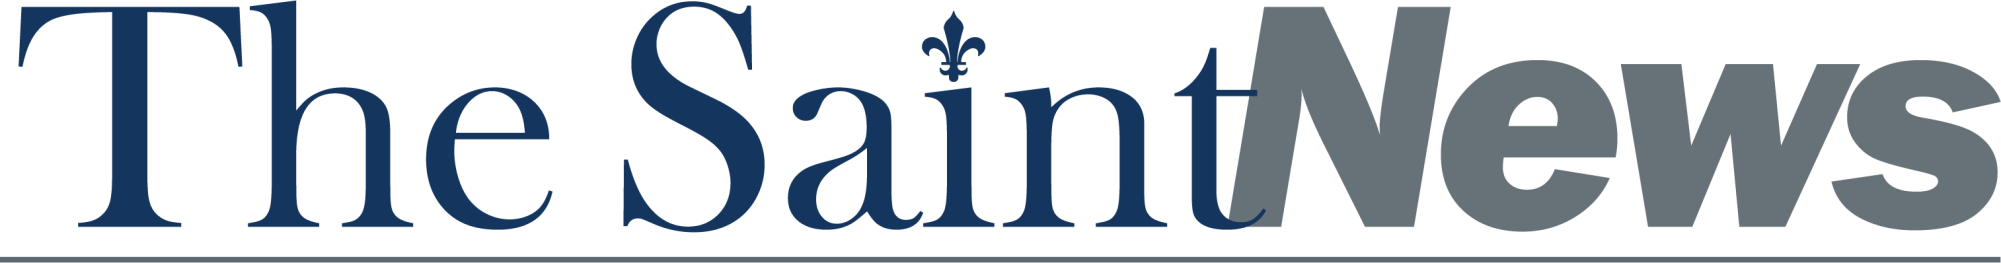 The Student News Site of All Saints' Episcopal School